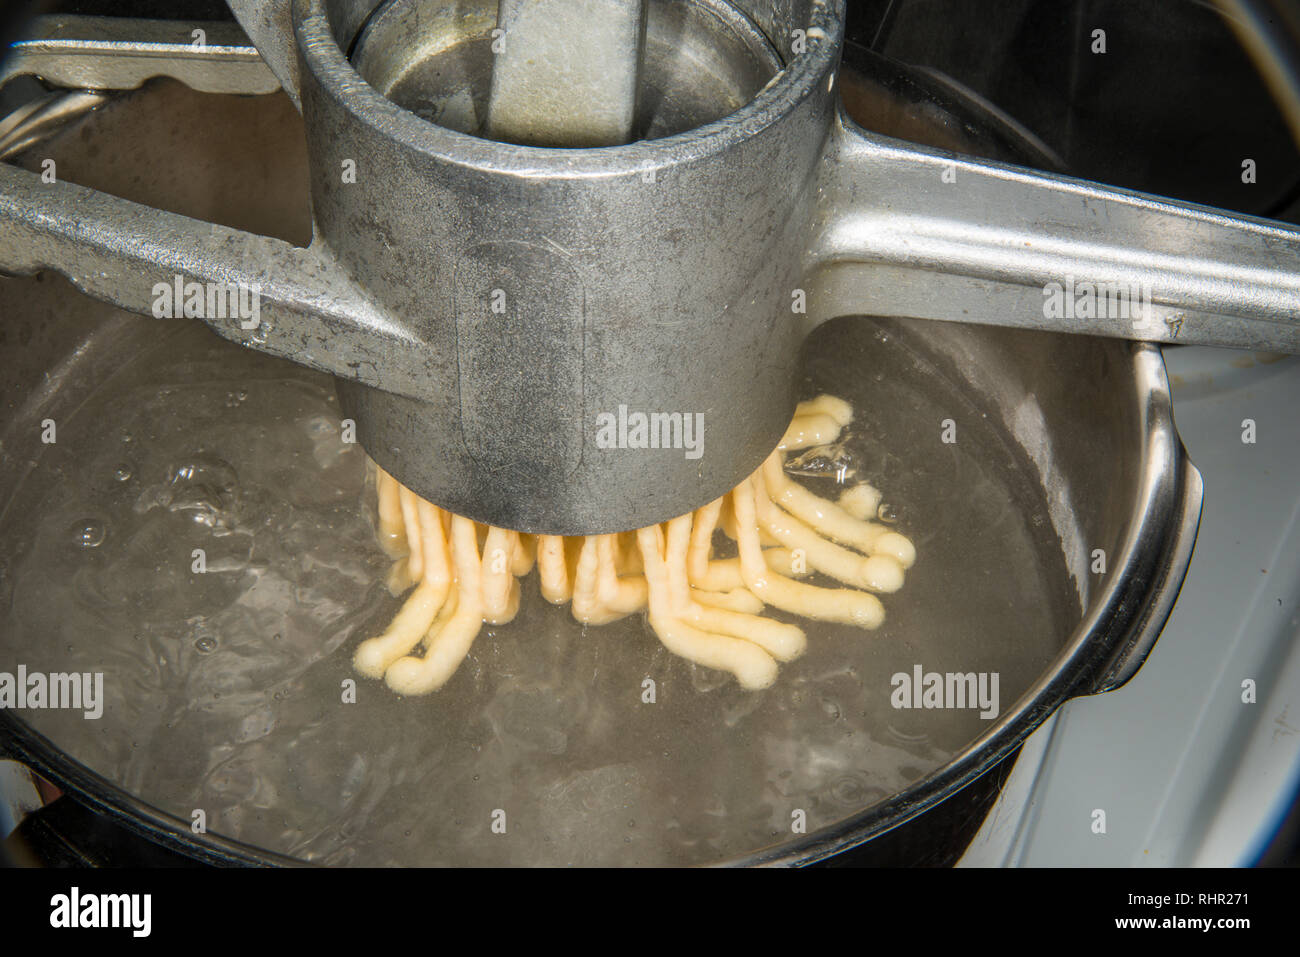 German noodle machine for spaetzle pressing noodles in cooking water Stock Photo